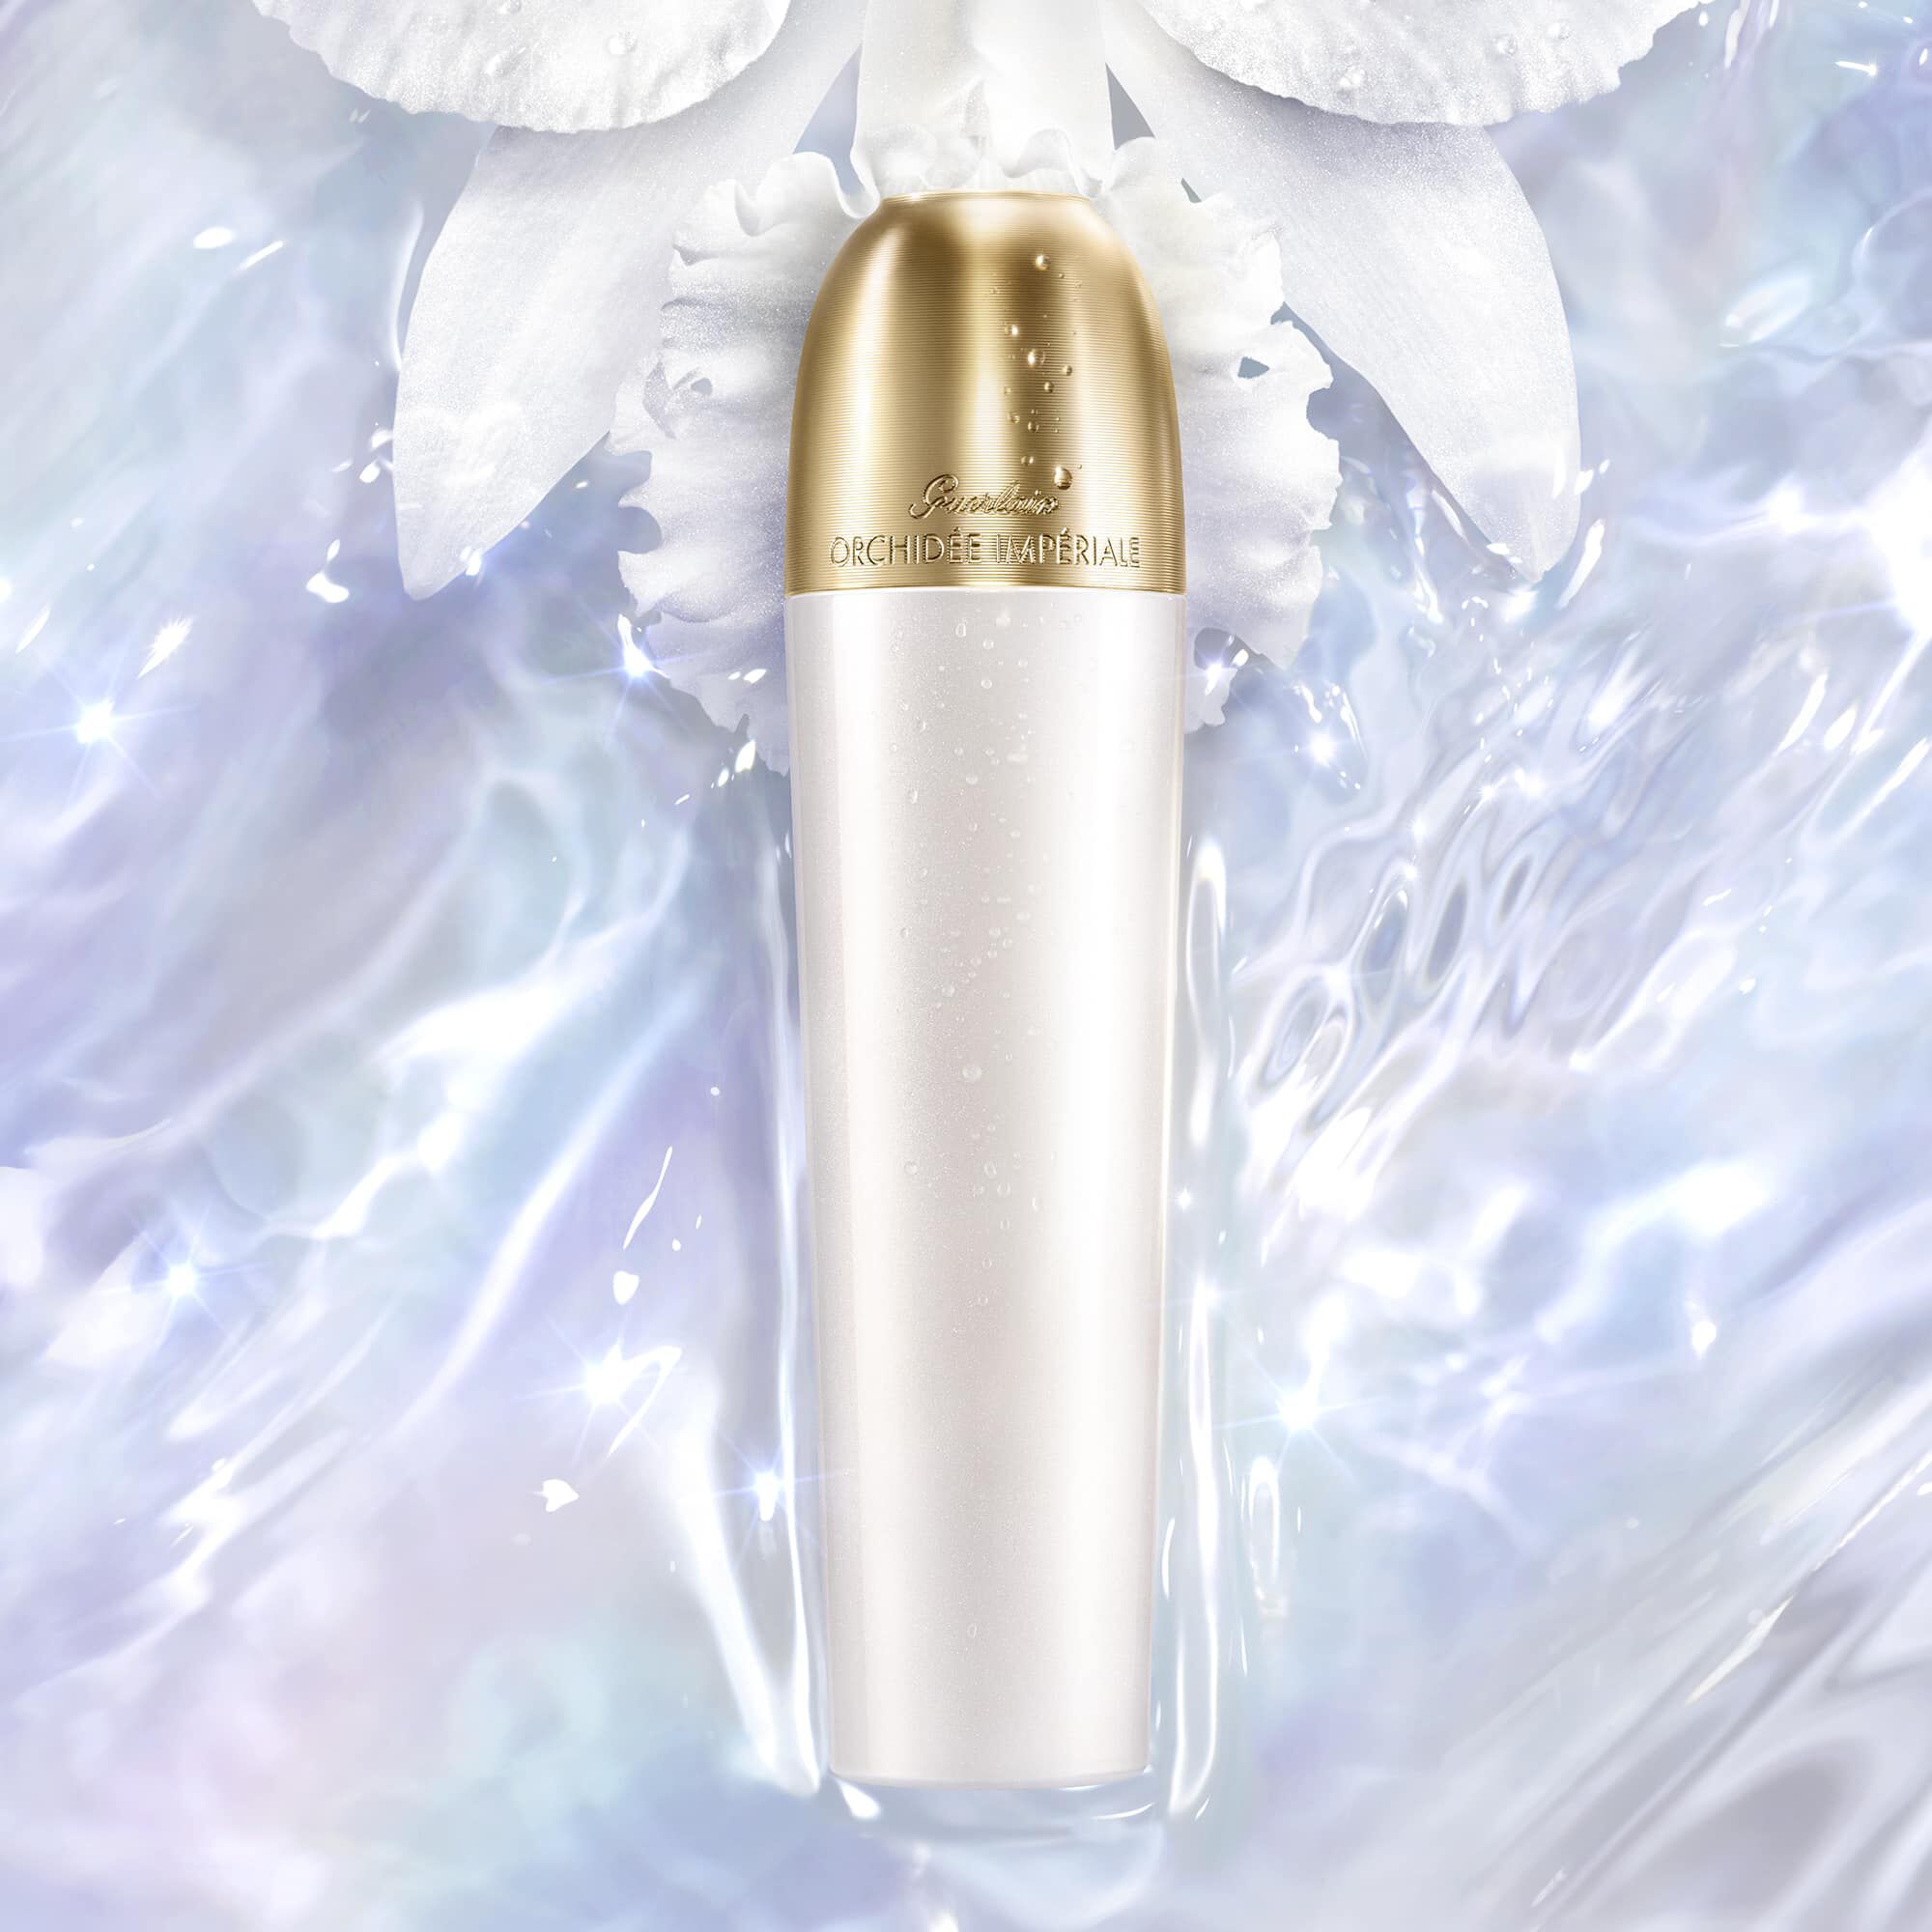 Orchidée Impériale brightening ⋅ The brightening Essence-in